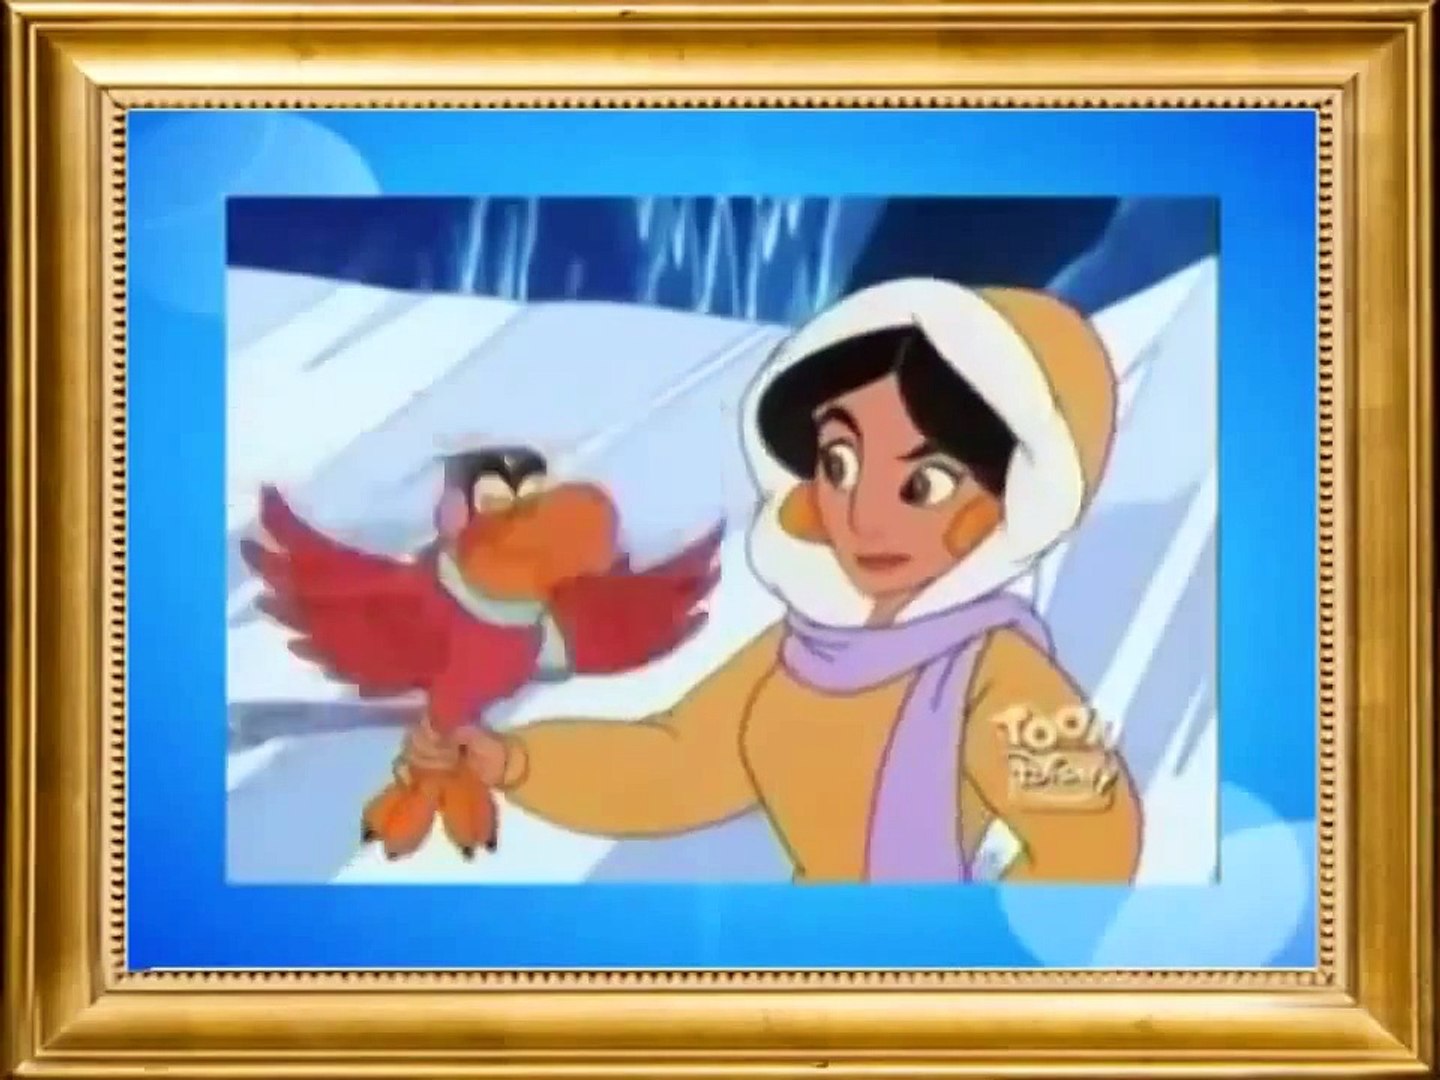 Aladdin Cartoon Episode 127 Of Ice and Men Aladdin Episode in Hindi HD 2014  - video Dailymotion